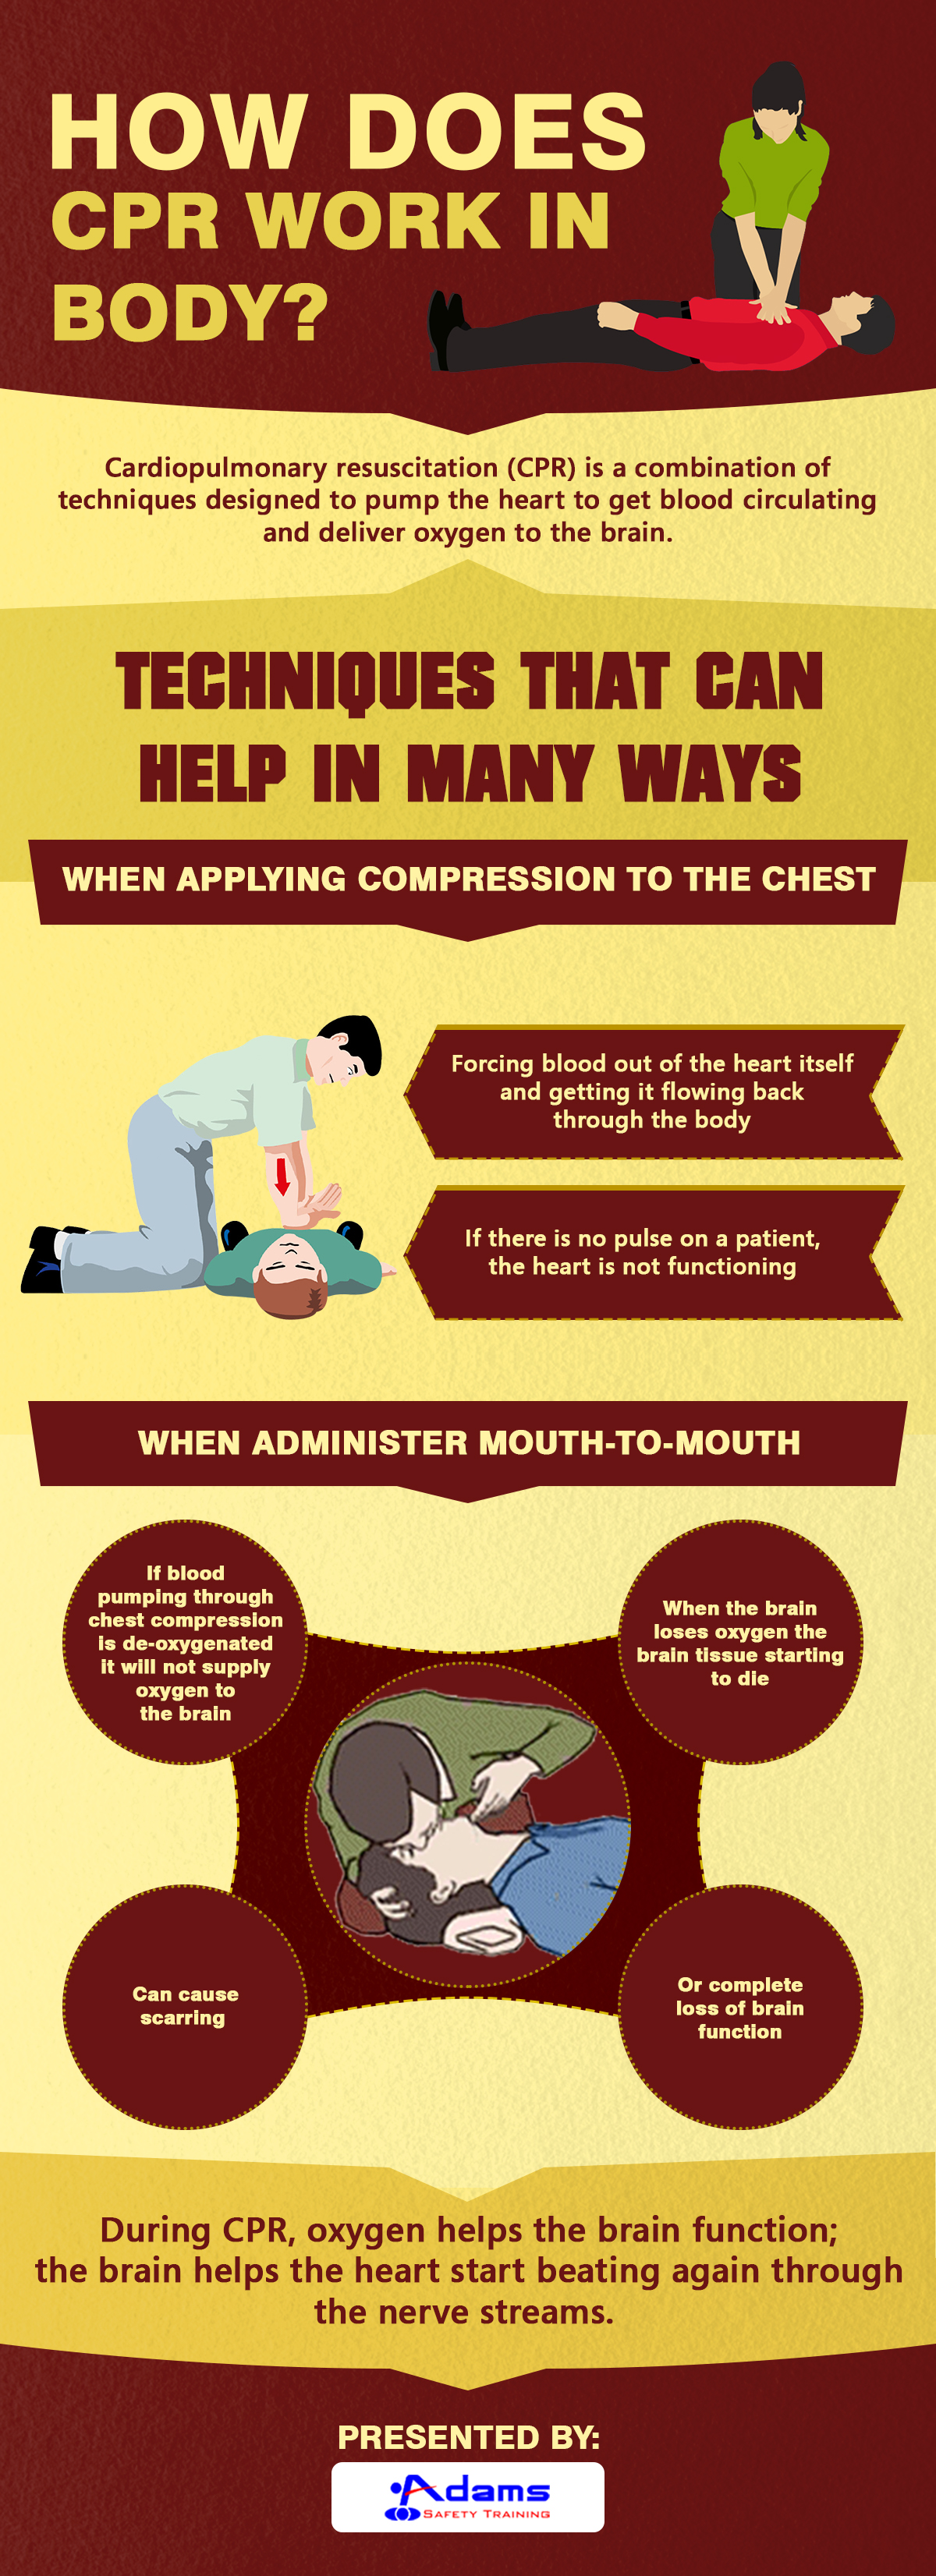 How CPR works